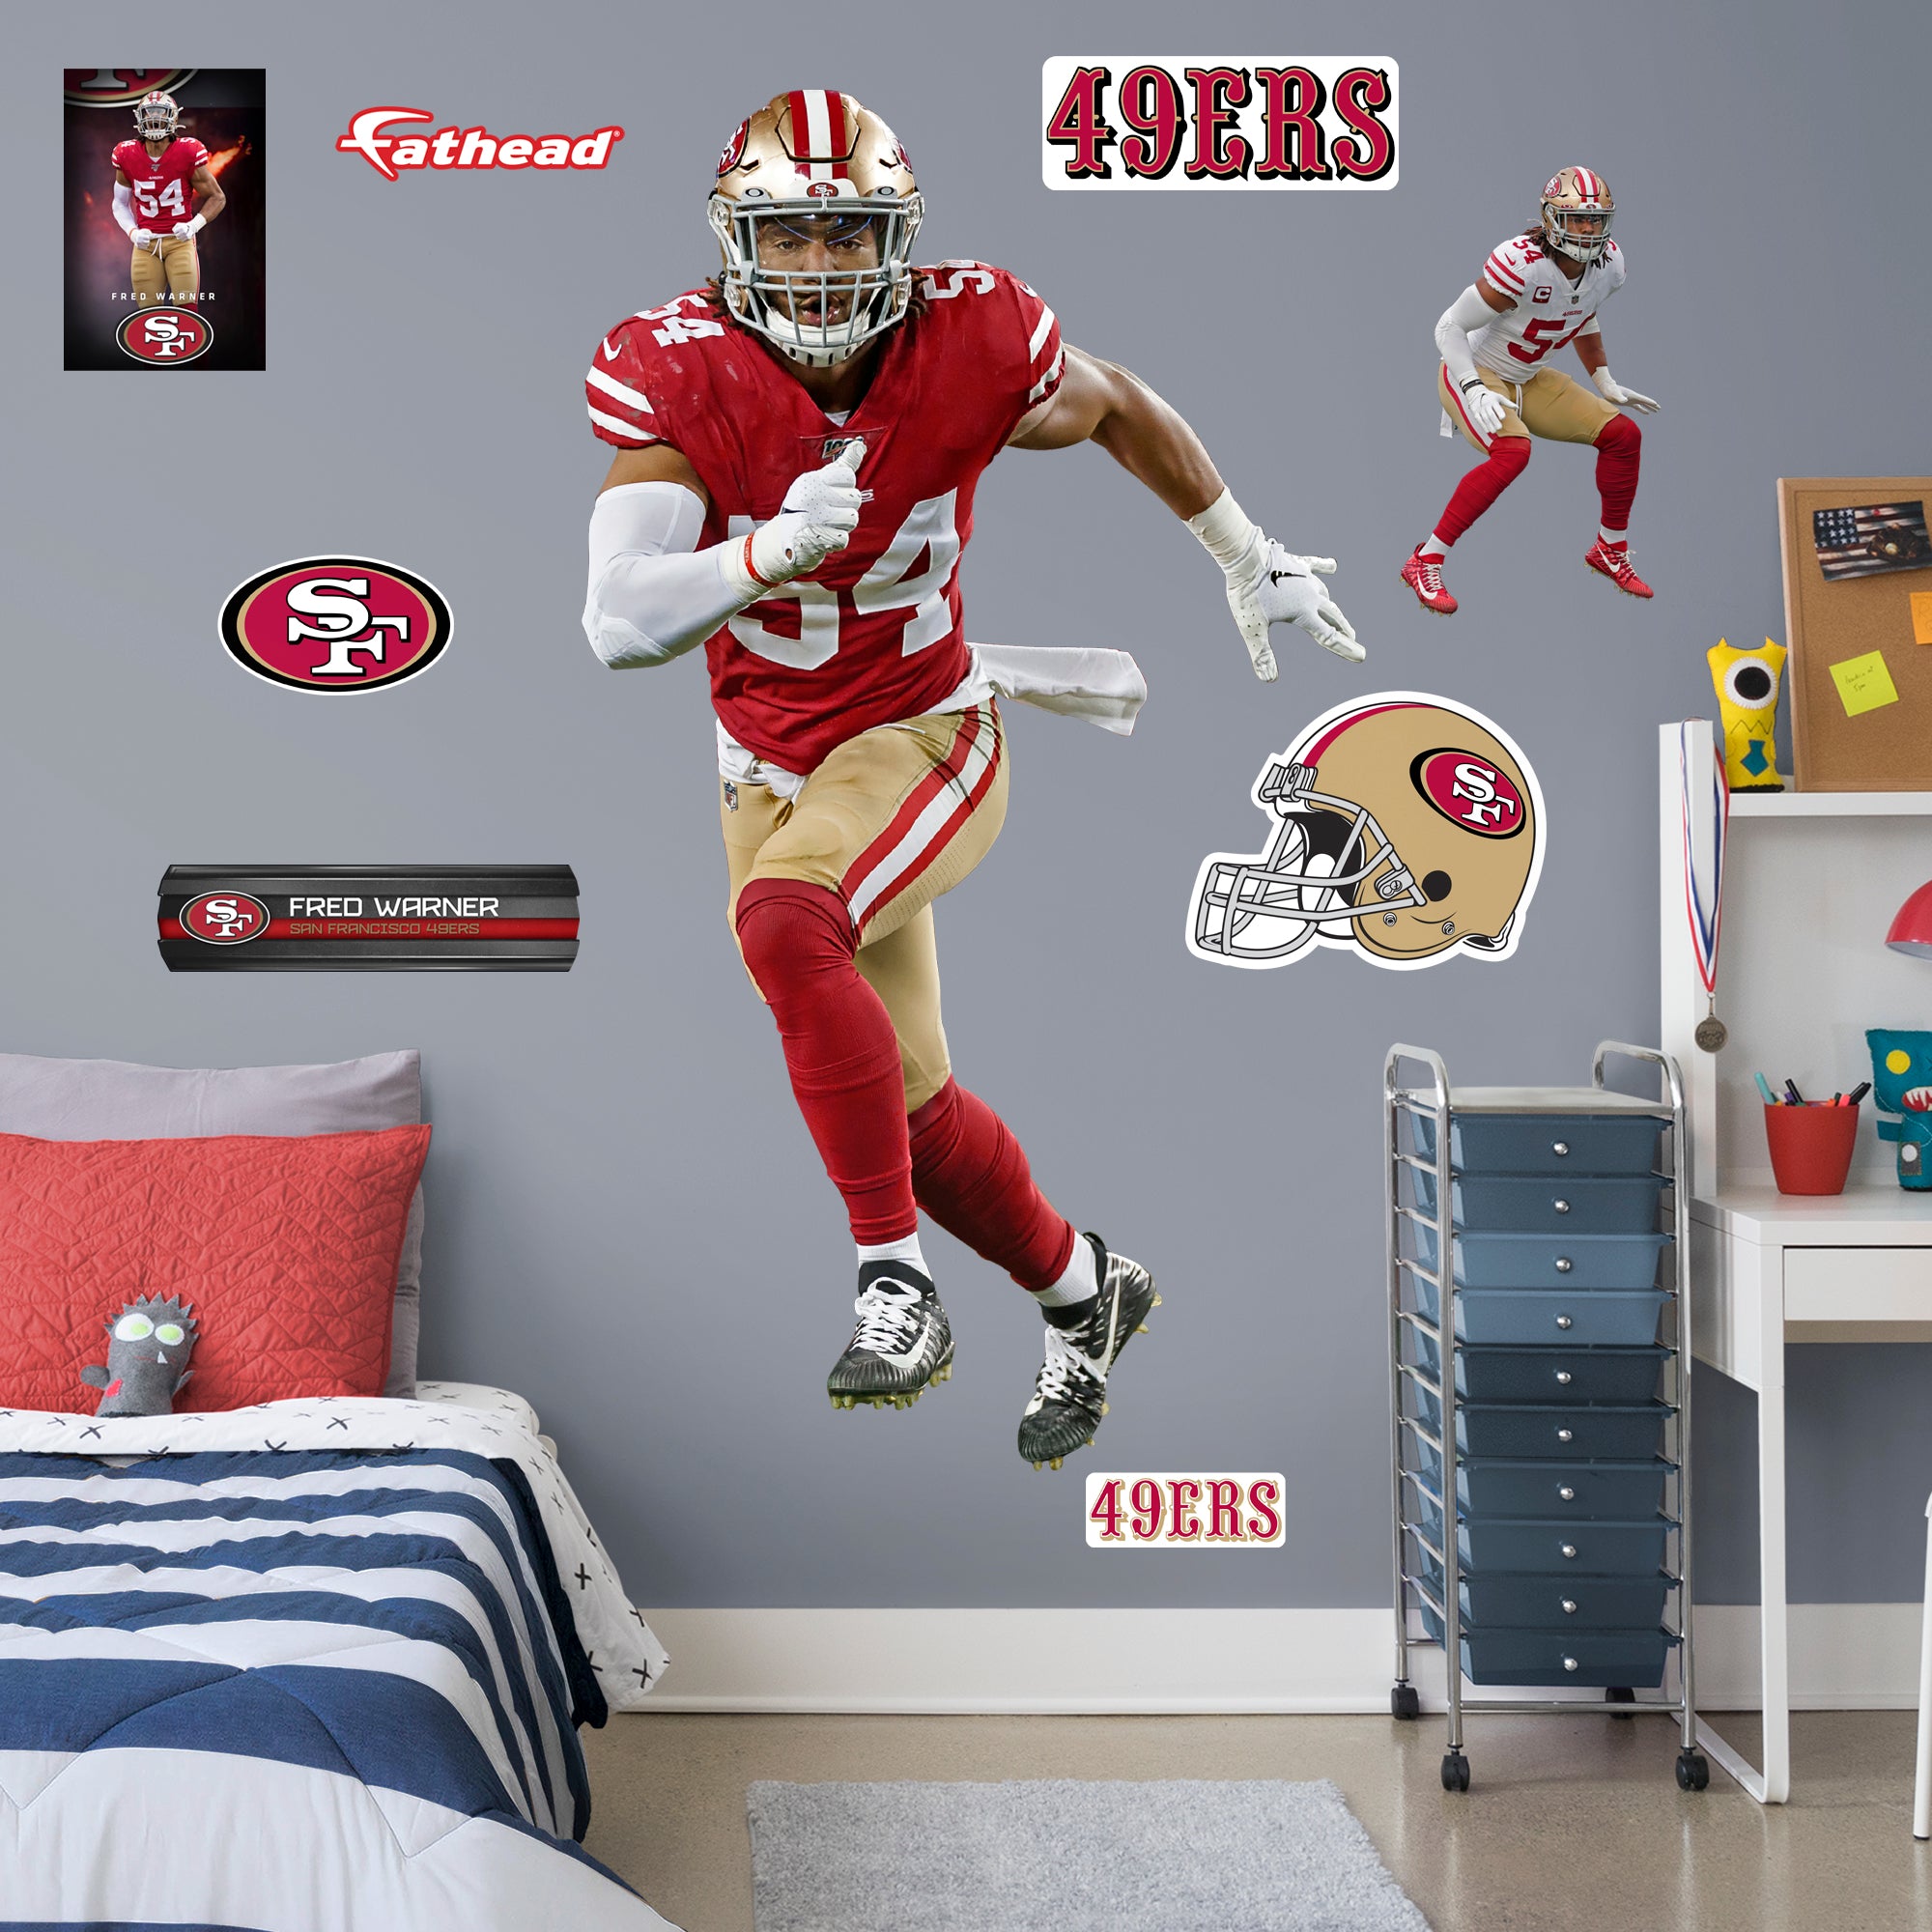 Fred Warner 2020 - Officially Licensed NFL Removable Wall Decal Life-Size Athlete + 8 Decals (44"W x 77"H) by Fathead | Vinyl